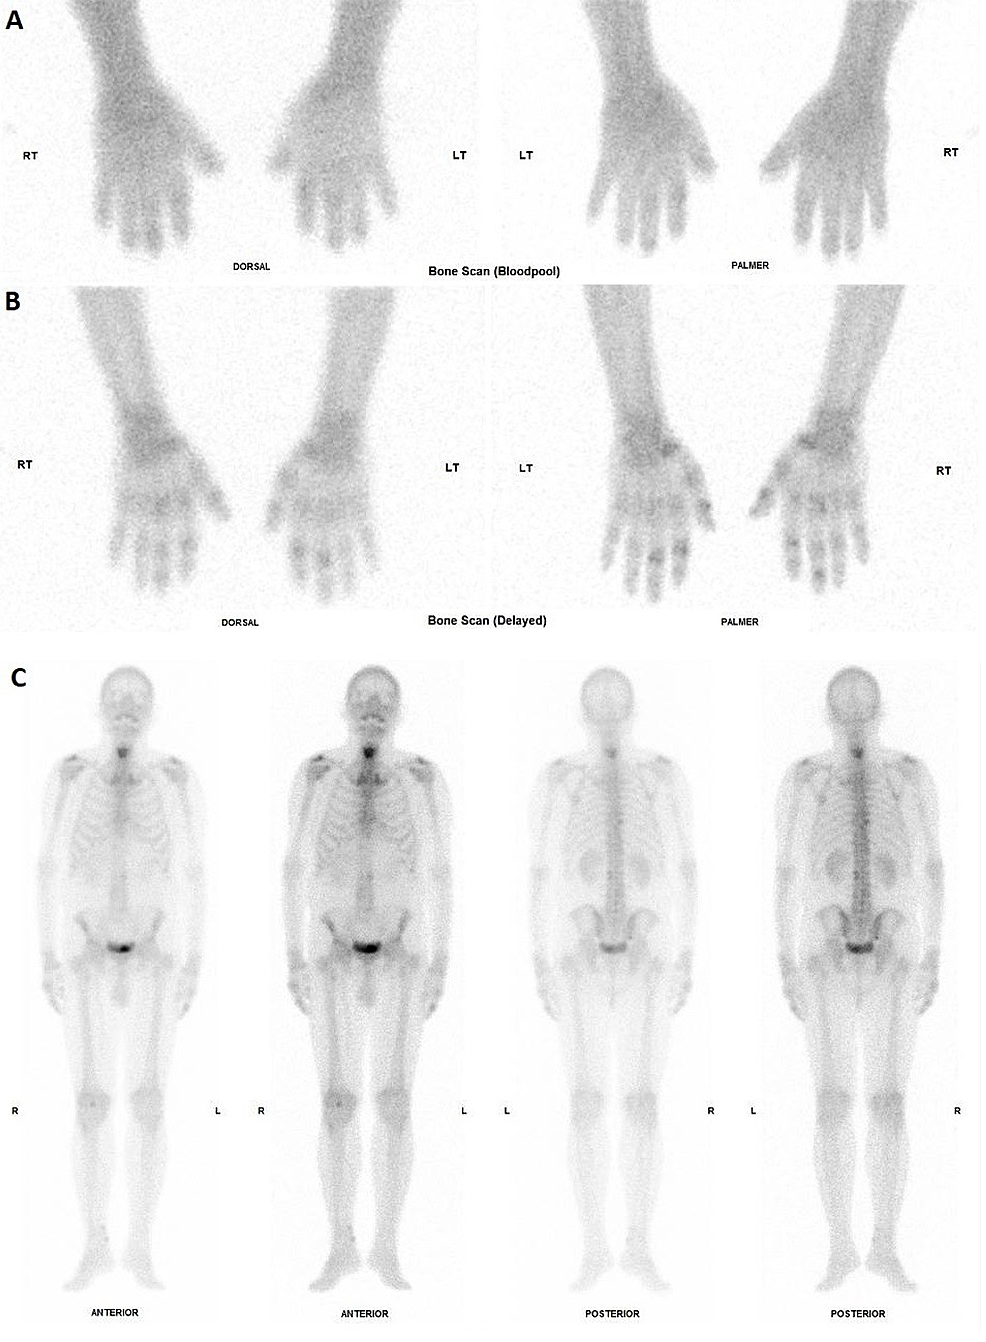 Triphasic-bone-scan-images-showing-(A)-symmetrically-increased-radiotracer-uptake-in-both-hands-in-the-blood-pool-phase,-(B)-increased-peri-articular-radiotracer-uptake-in-the-small-joints-of-the-hands,-and-(C)-more-prominent-radiotracer-activity-in-the-hands-compared-to-the-lower-limbs-and-other-major-joints.